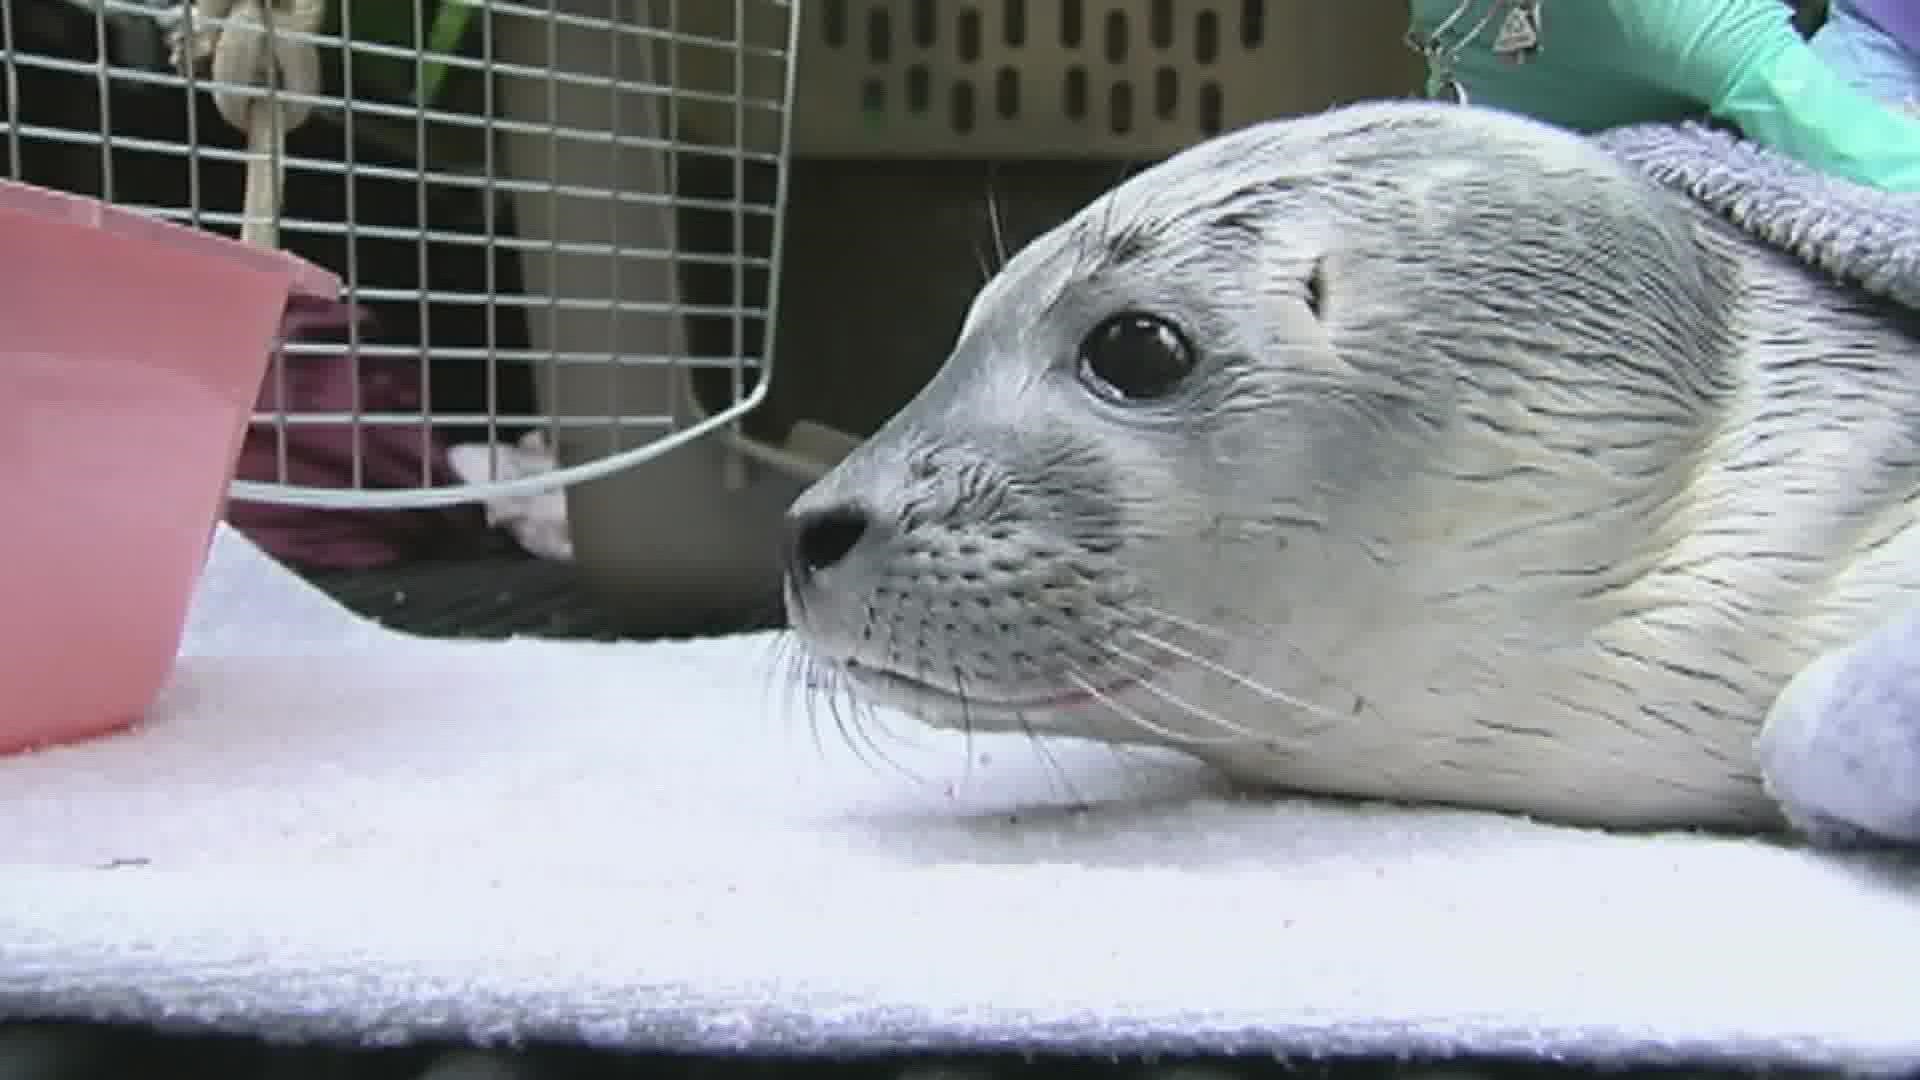 Researchers say they hope the technology will help inform conservation efforts for several different species of seals.